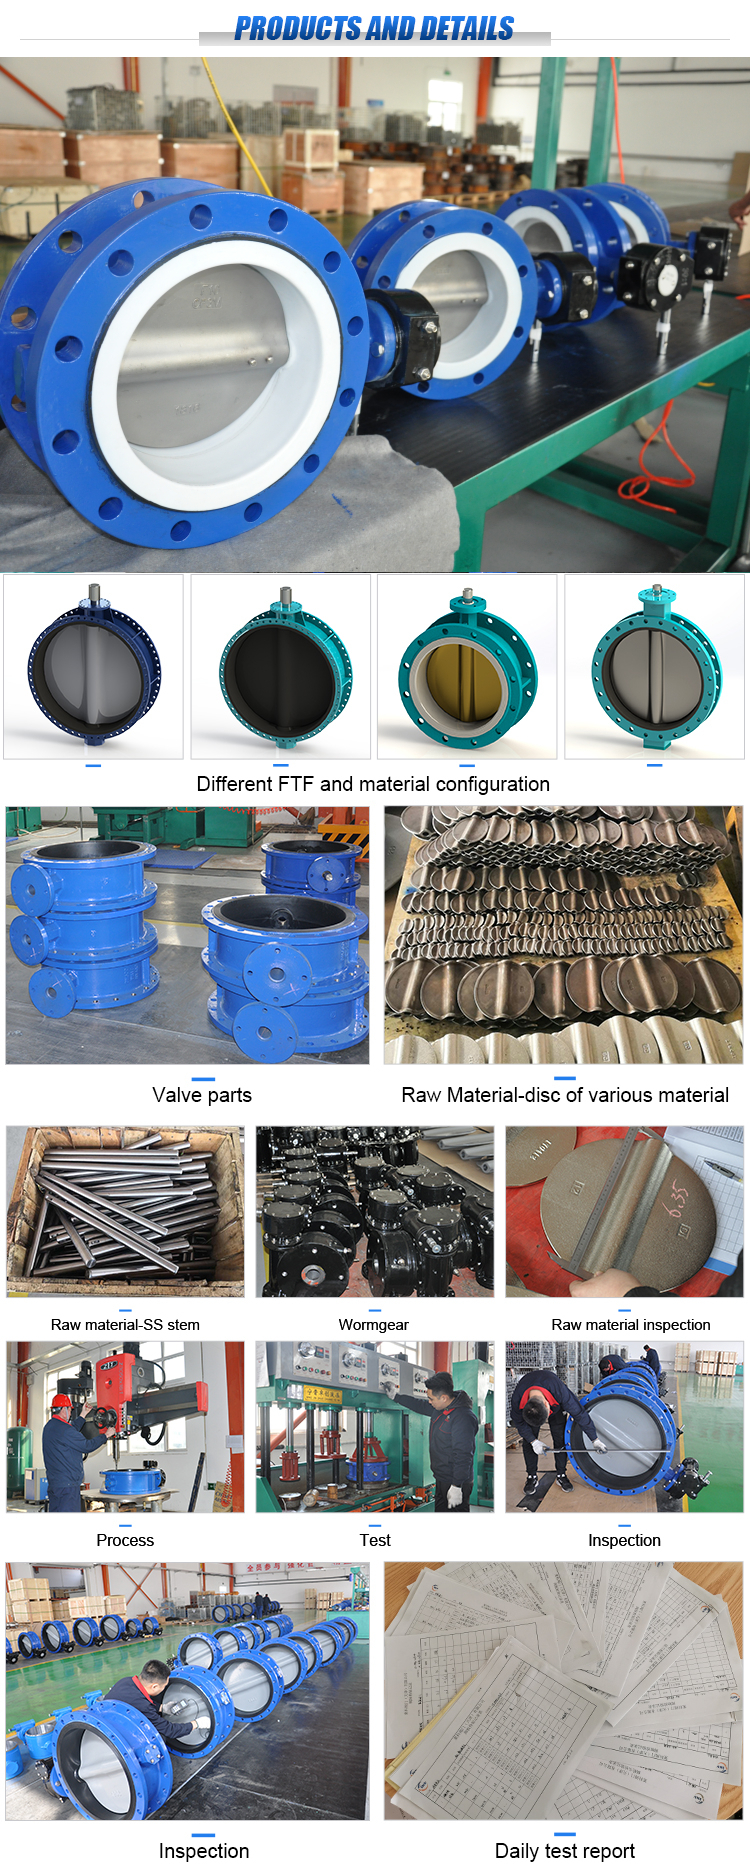 Product Name PTFE Seal Pn10/16/25 Double Flange Butterfly Valve with Worm Gear Operated Size (mm) 50-2000mm Flange connection standard selection EN1092 PN10,PN16; ASME 125LB,150LB; JIS10K;      Material Selection Body/Shell GGG40/50; WCB; CF8; CF8M; 2205; 2507; Al-bronze Disc GGG40/50; CF8; CF8M; 2205; 2507; 1.4529; Al-bronze; Rubber coated; PTFE lined; Nylon coated; Halar coated Stem/shaft SS410/420/416; SS431; SS304; Monel   Seat material and suitable Temp. EPDM -10 ~ +80 NBR -10 ~ +80 Vaiton -10 ~ +180 Heat resistant EPDM -10 ~ +120 PTFE -10 ~ +150 Operating selection Hand Lever Worm gear Electric actuator Pneumatic actuator Hydraulic actuator